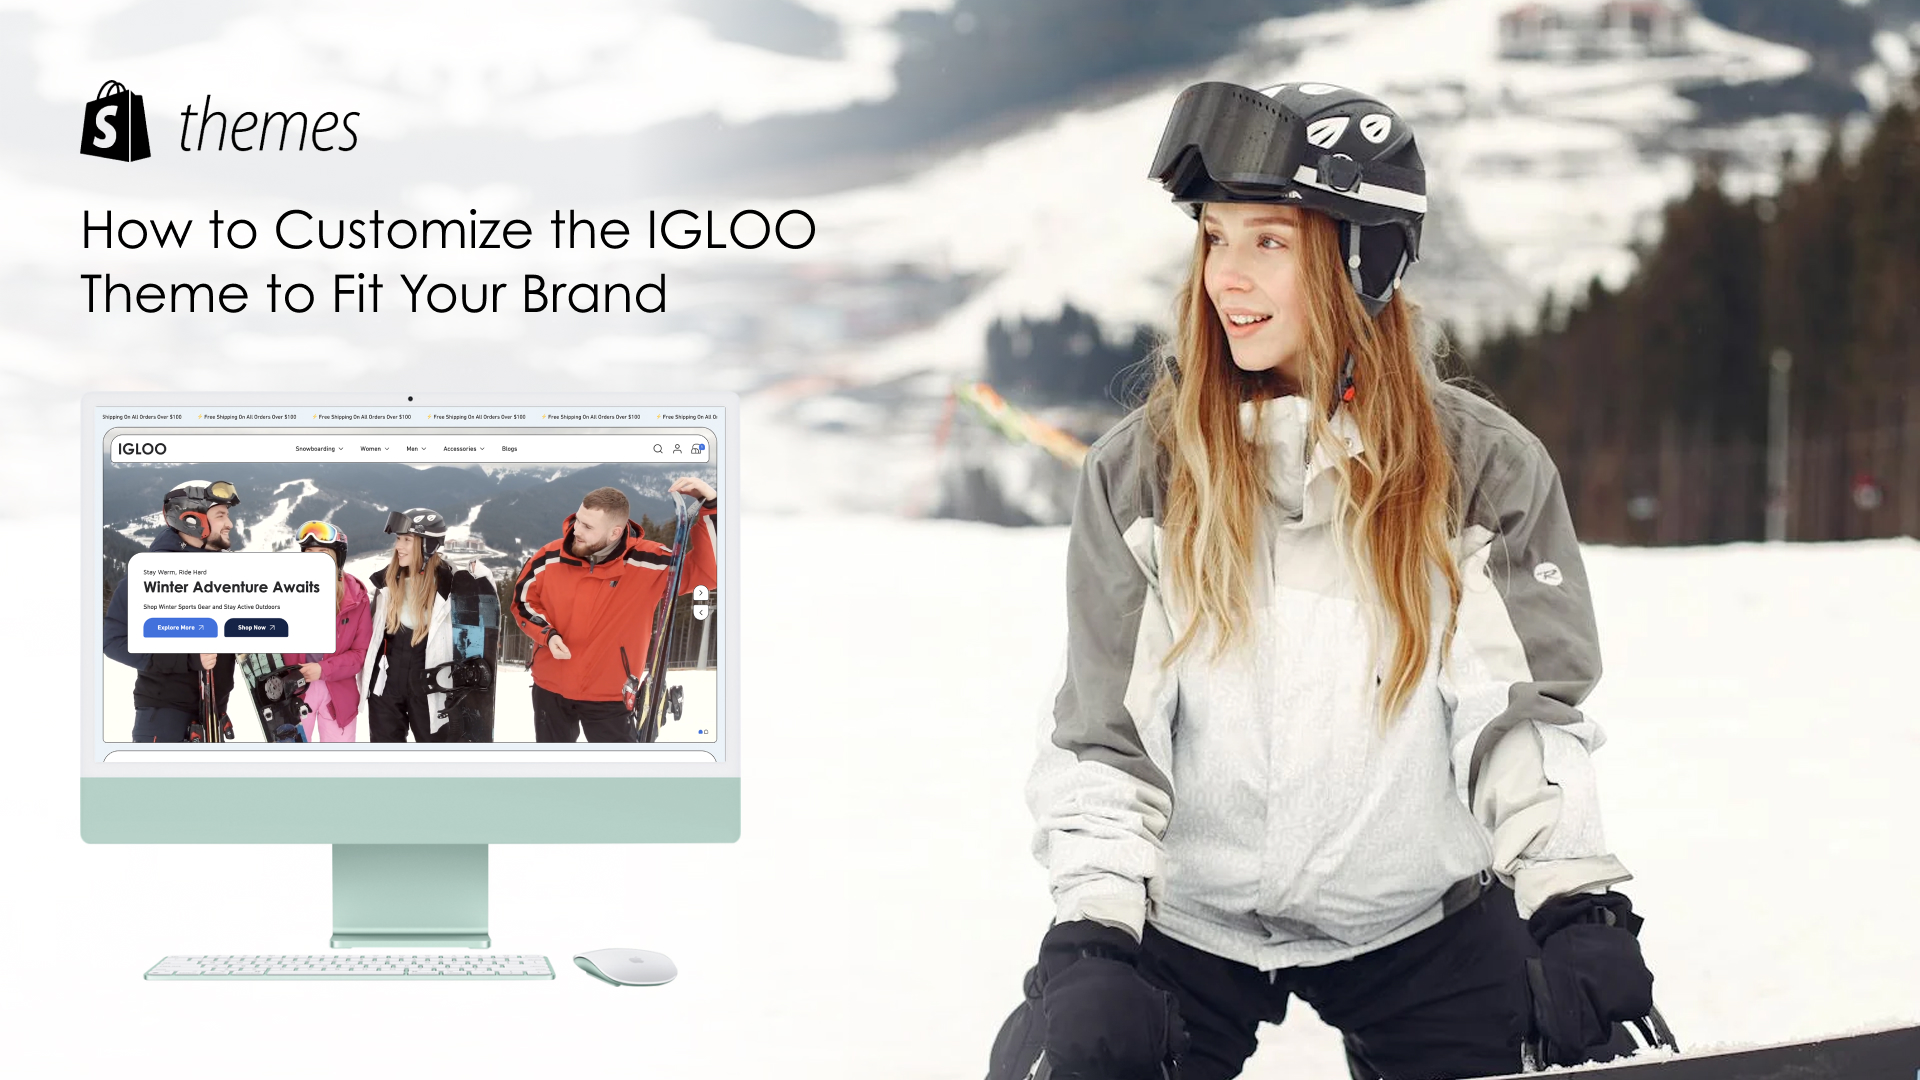 Key Features of the IGLOO Theme